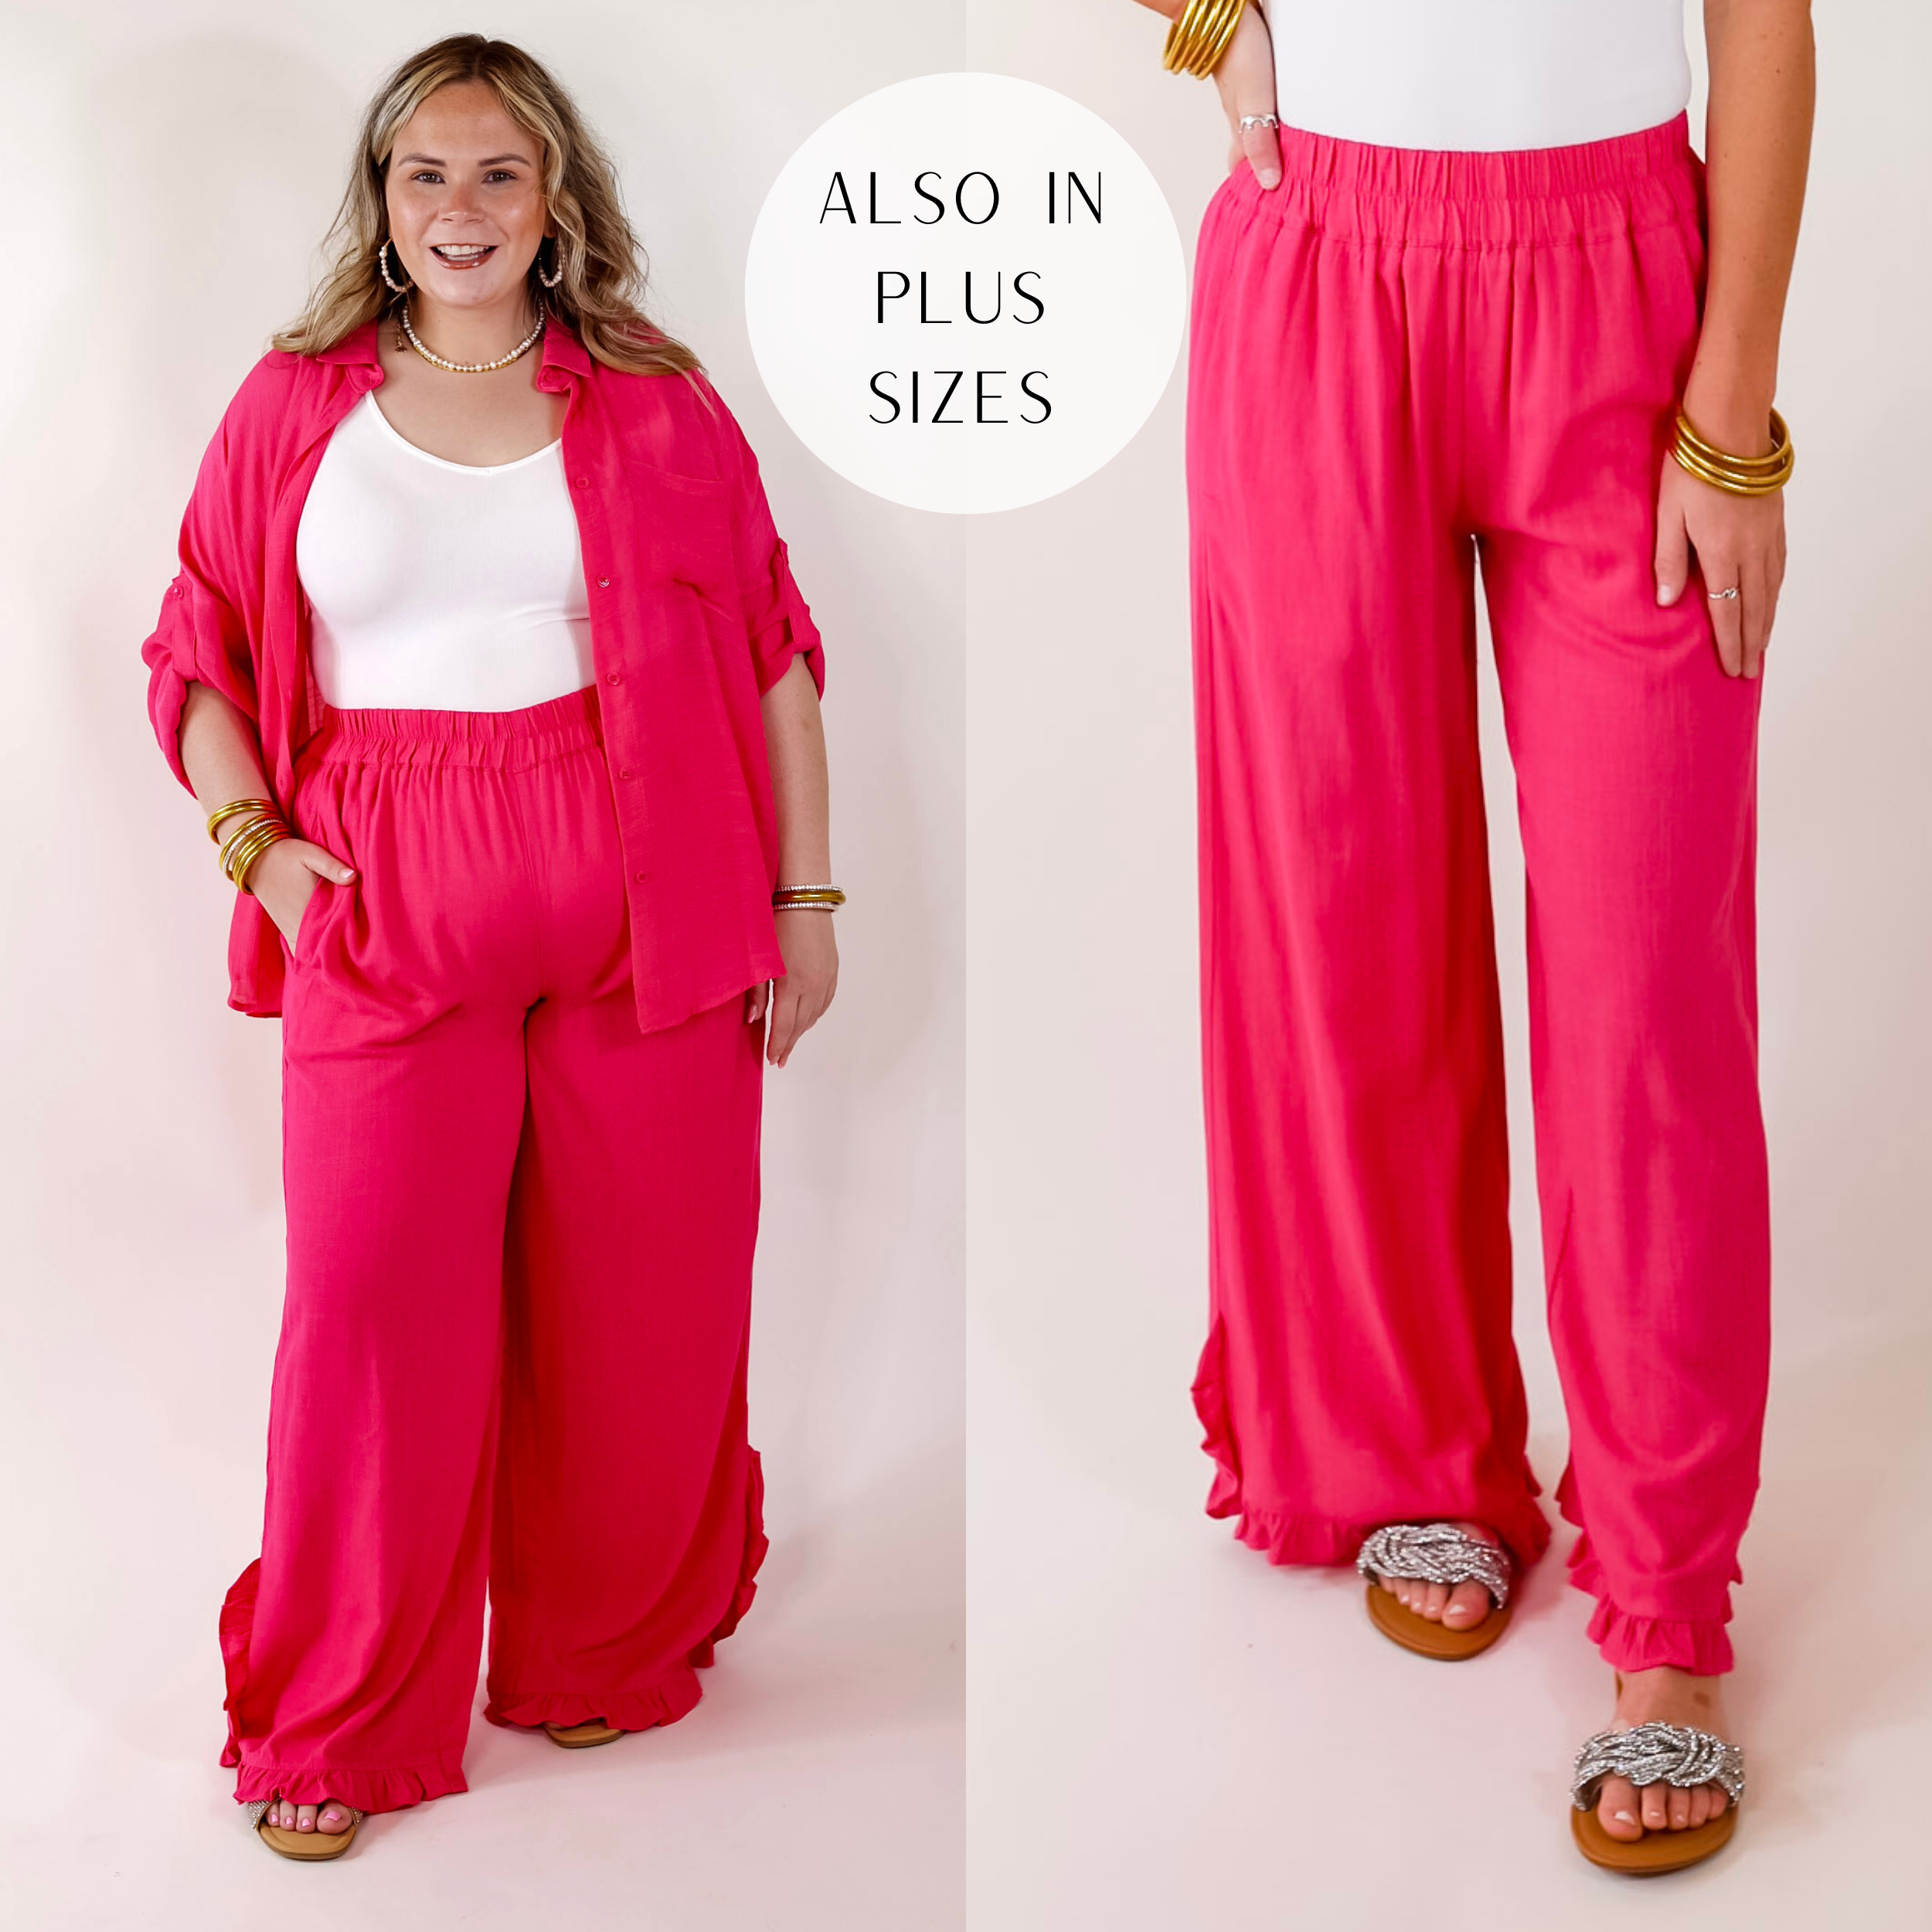 Model is wearing a pair of pink linen pants with a ruffle hem.